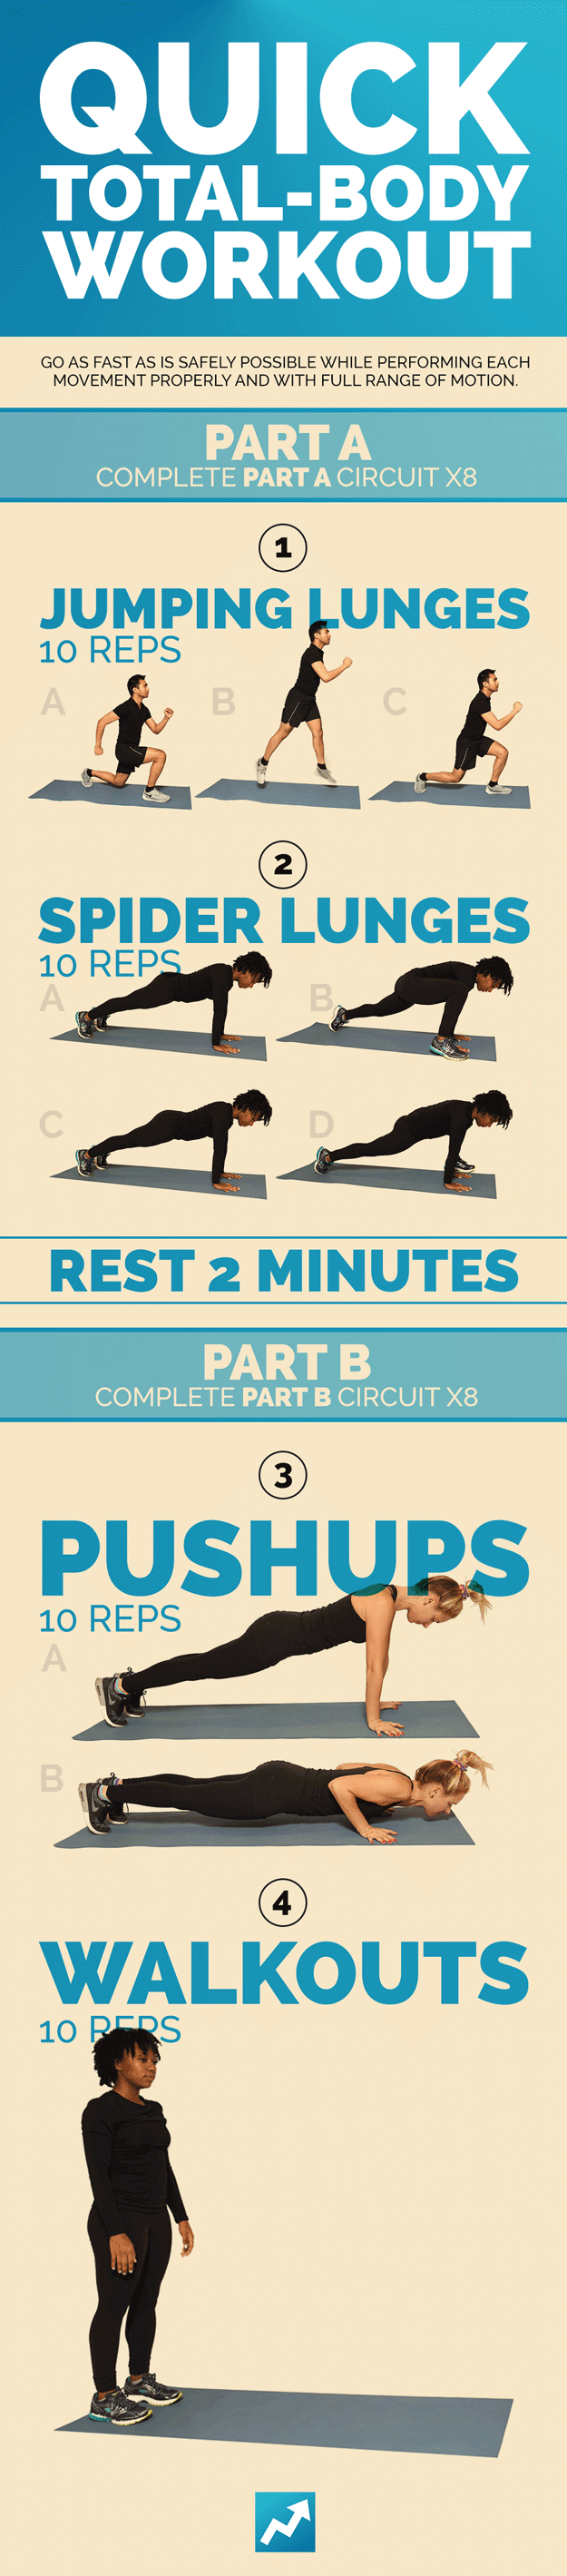 20 Minute Full Body Workout - No Equipment Needed